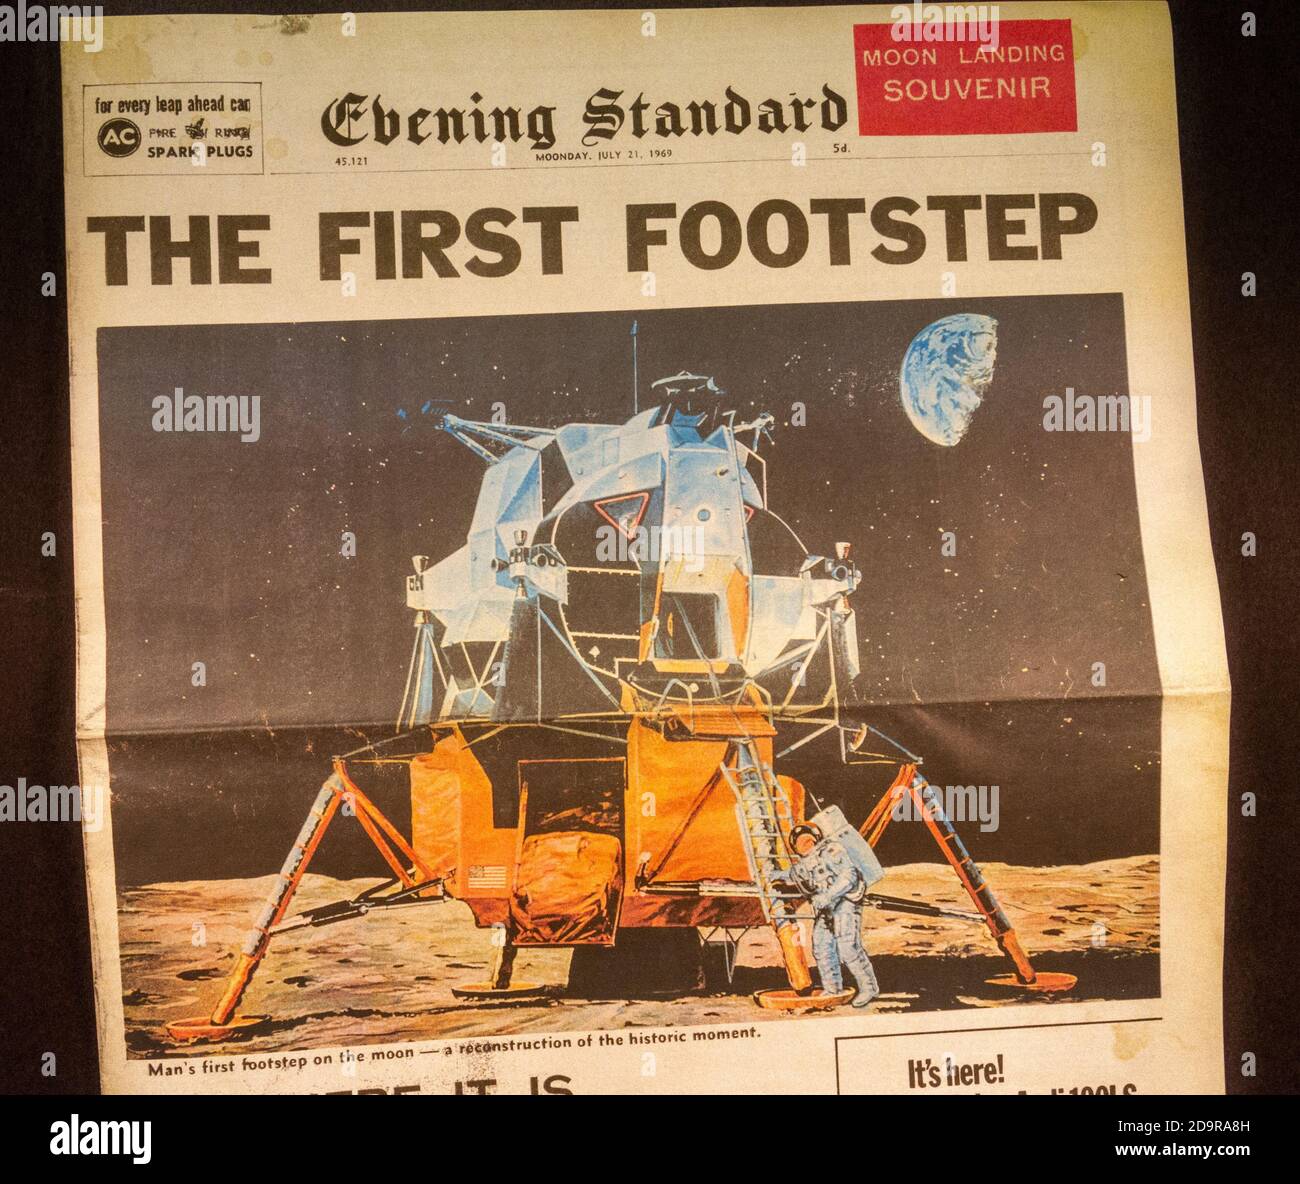 Front page showing the First Footstep of Neil Armstrong, Apollo 11 Moon landings in an Evening Standard souvenir newspaper (replica), 21st July 1969. Stock Photo